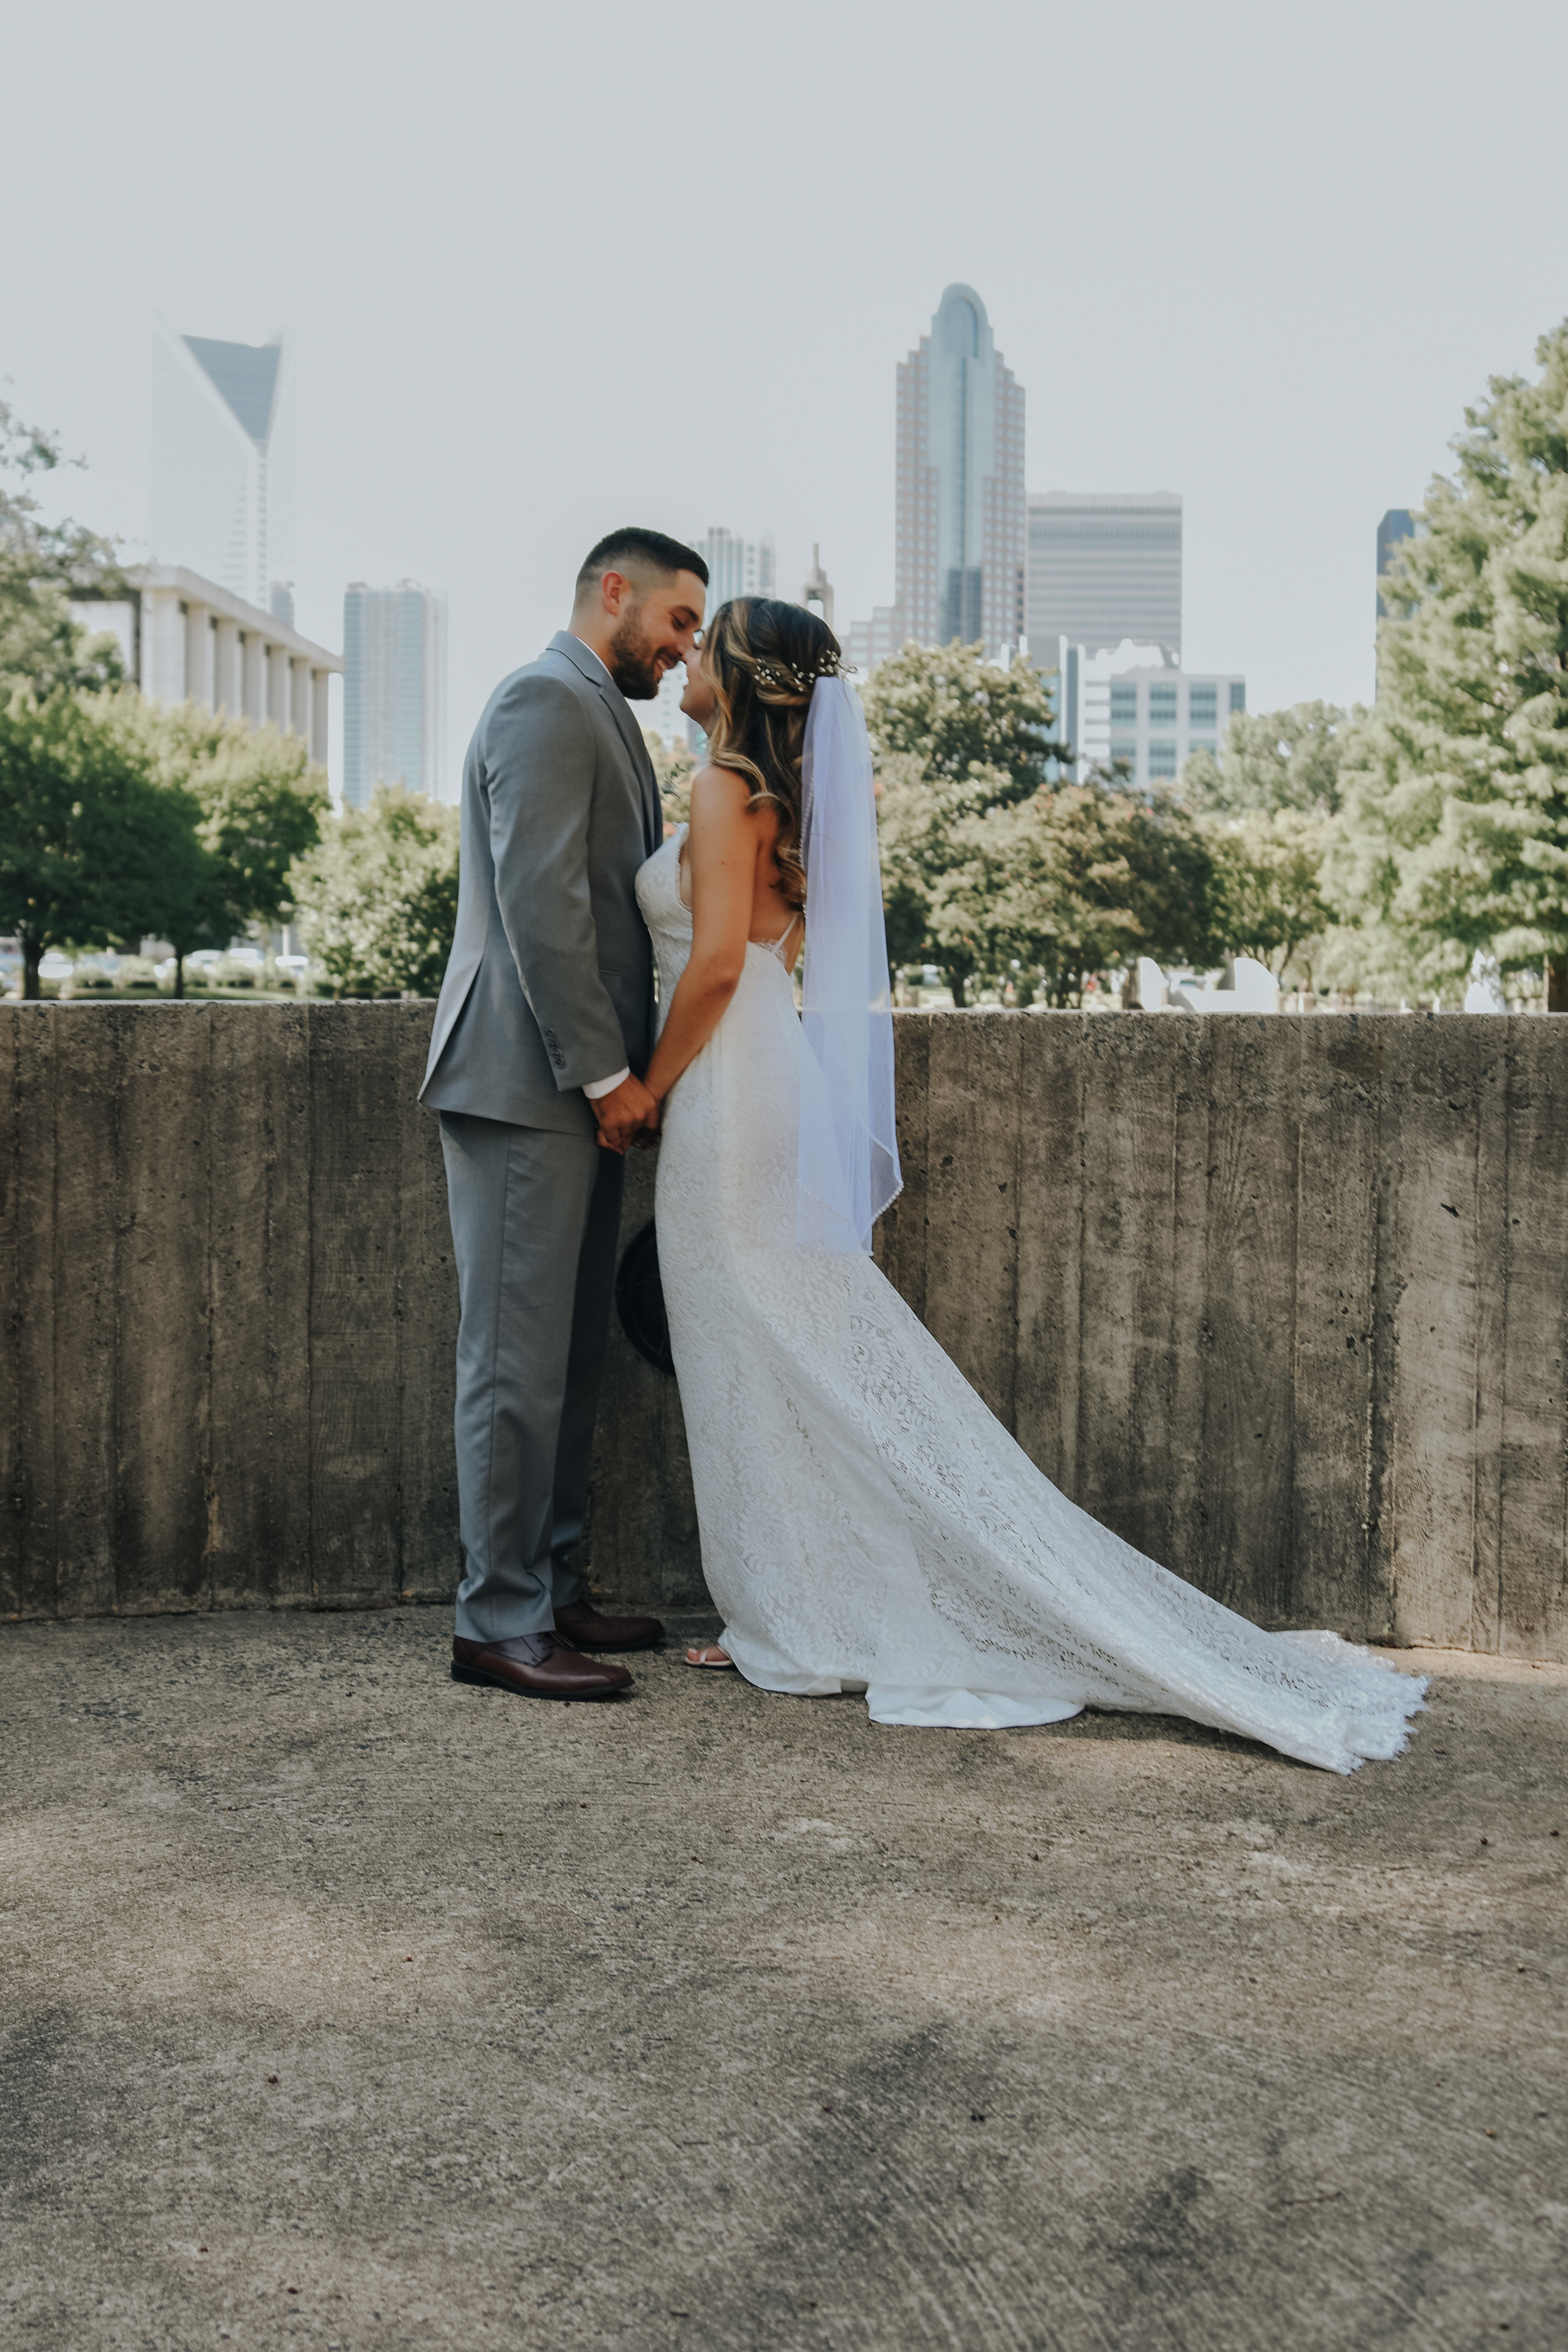  A picture of a couple celebrating their elopement, standing lovingly close together, almost kissing, as they hold hands with the city skyline behind them in Marshall Park by Vanessa Venable - Charlotte North Carolina elopement photographer 